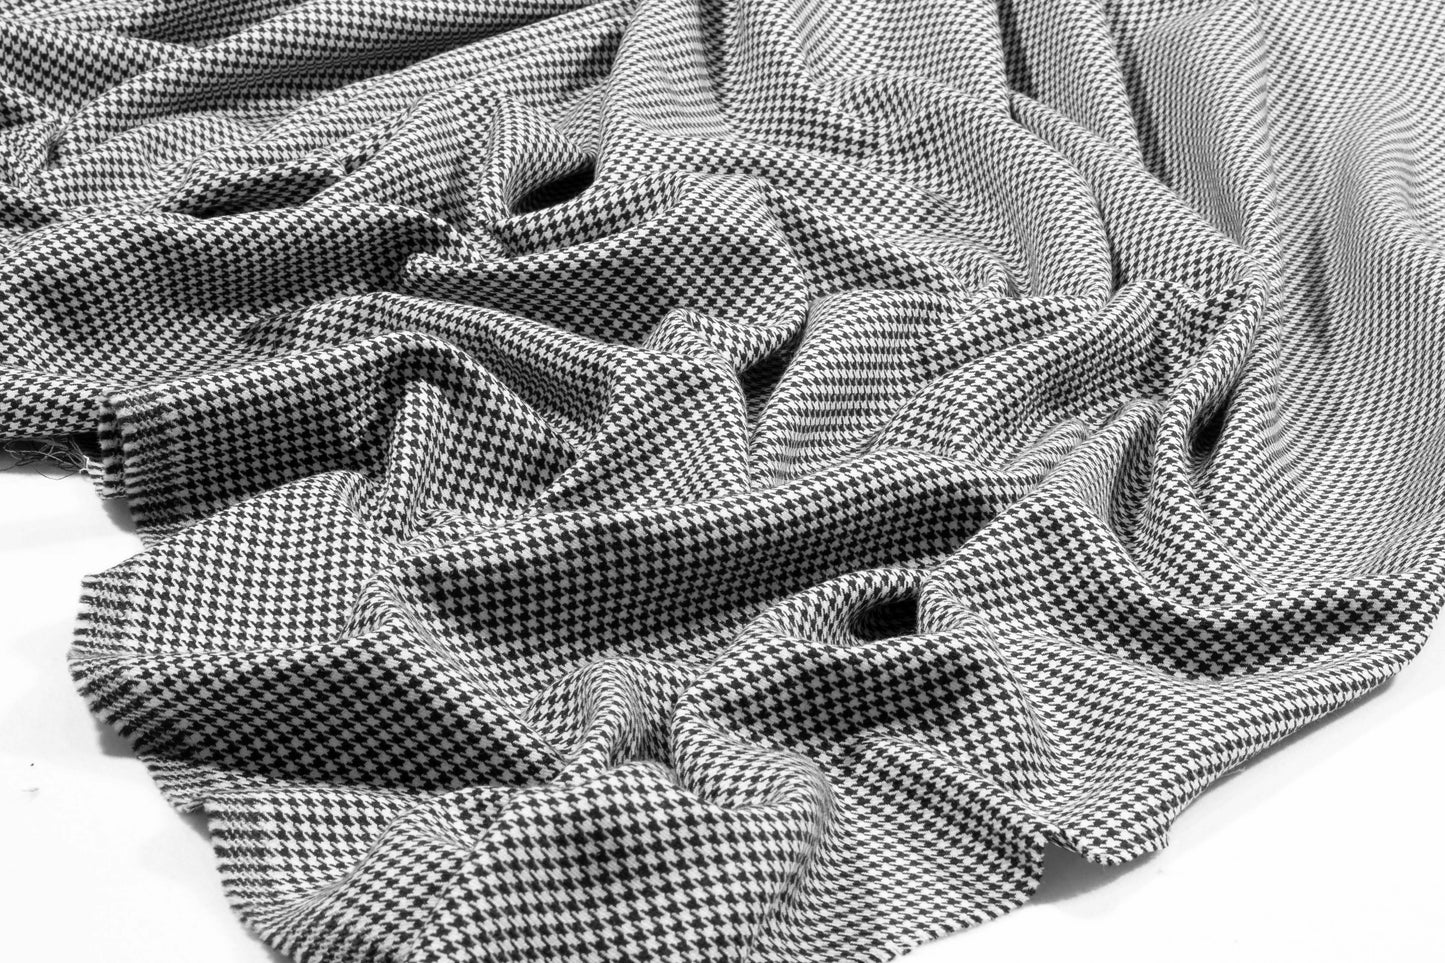 Off White and Black Houndstooth Italian Wool Suiting - Prime Fabrics